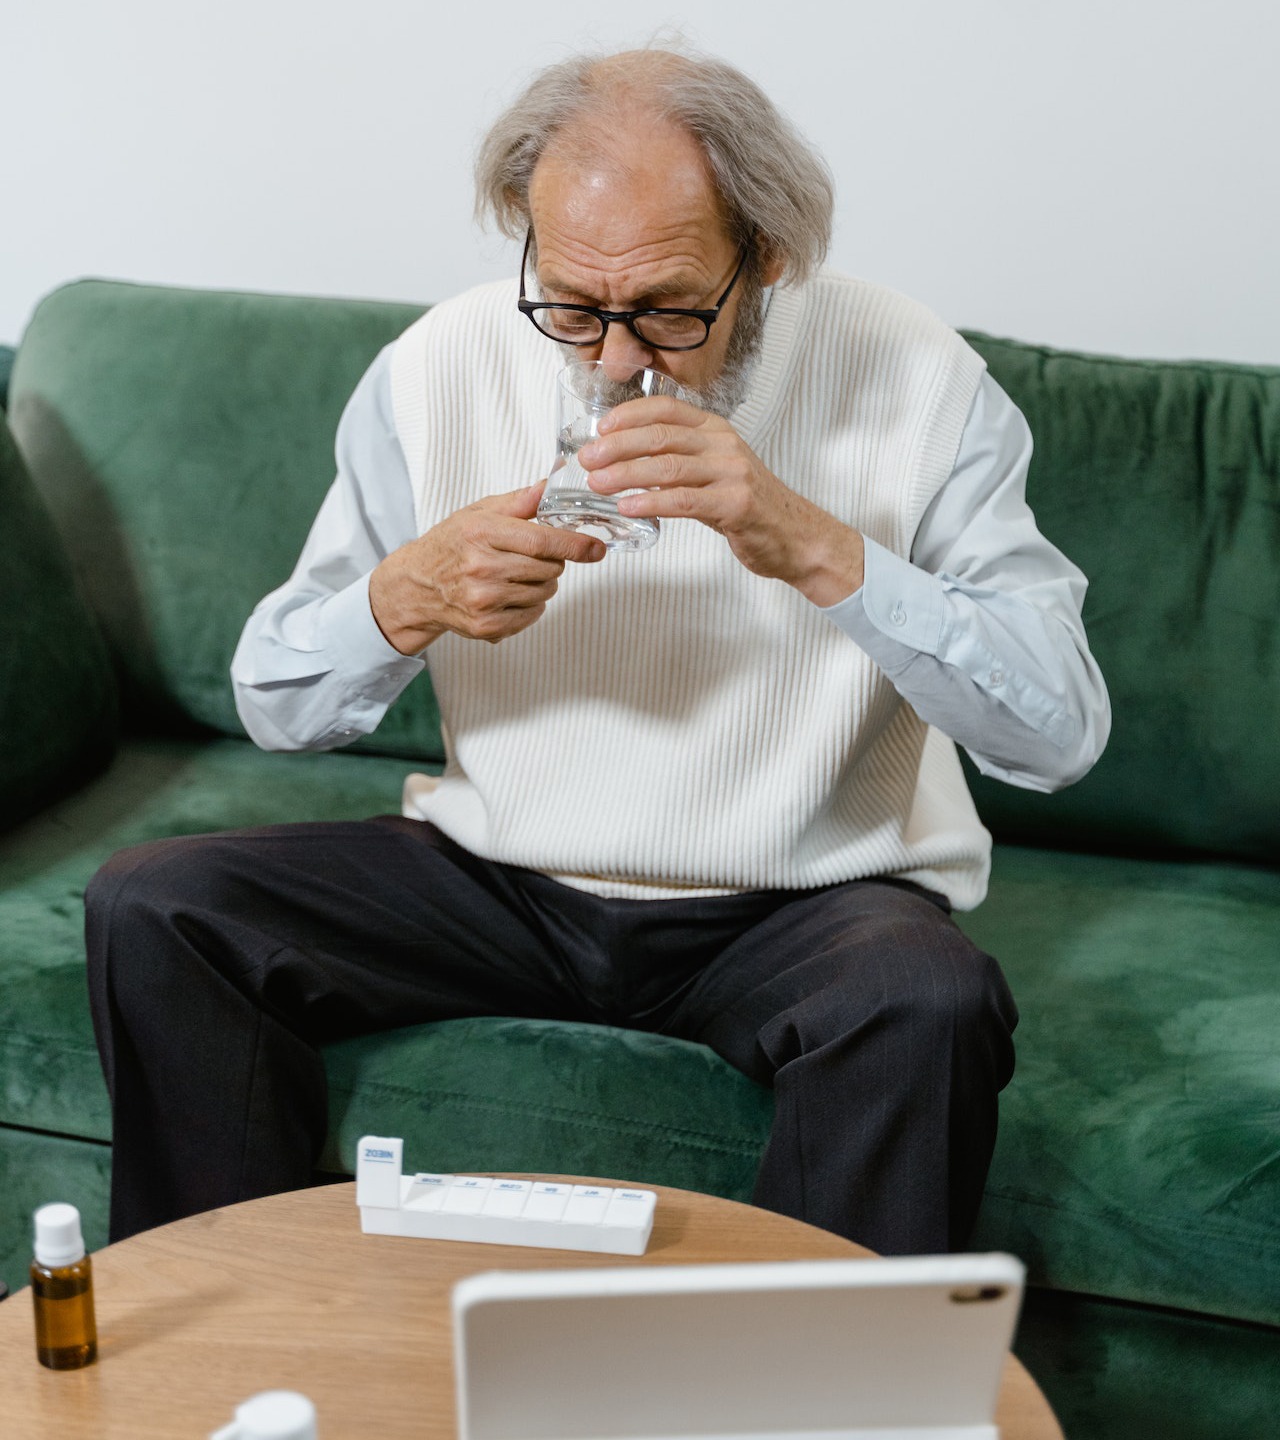 elderly man taking his medicine while sitting on green couch